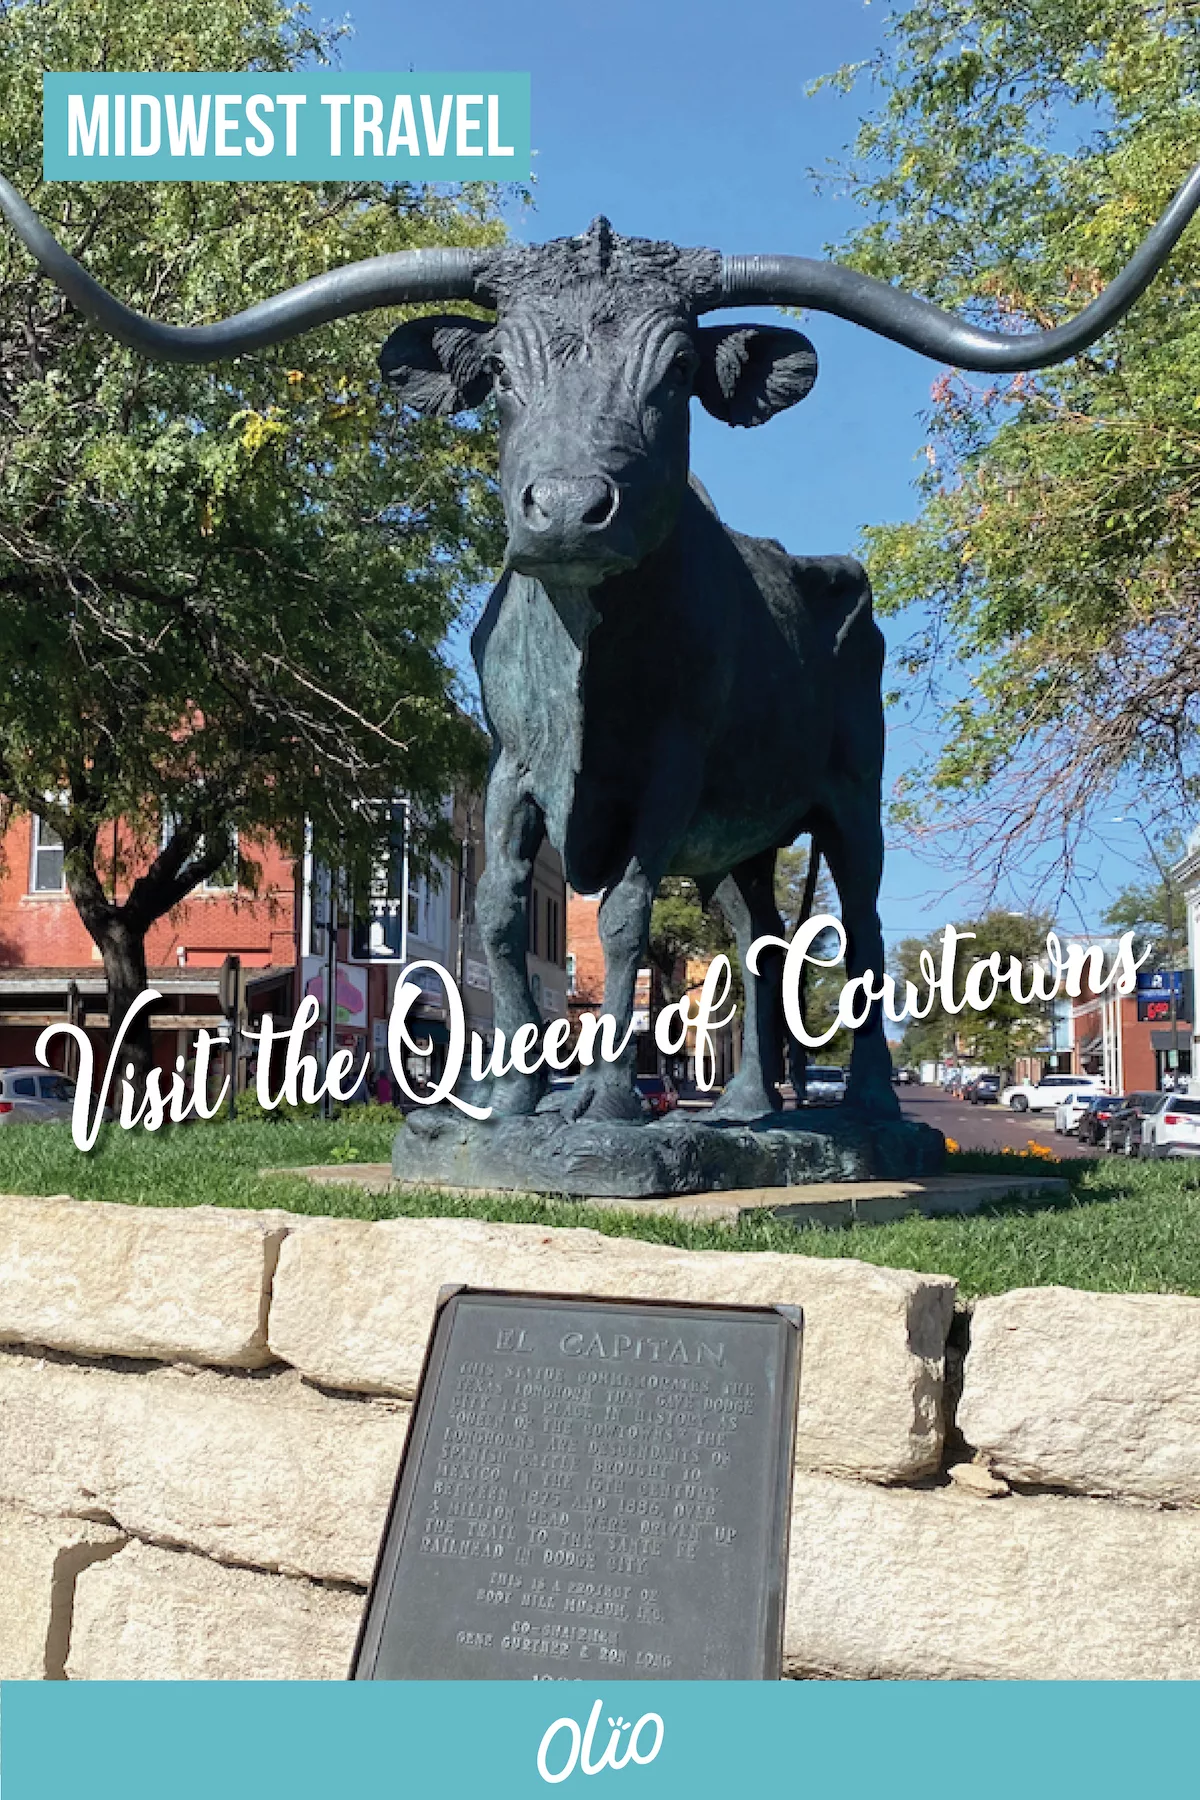 Welcome to the Wild West! Dodge City, Kansas was once one of the most notorious towns in the West. Things have quieted down but there are still lots of things to do in Dodge City, Kansas. From rich local history to epic eateries, there are lots of reasons to explore the Queen of the Cowtowns.